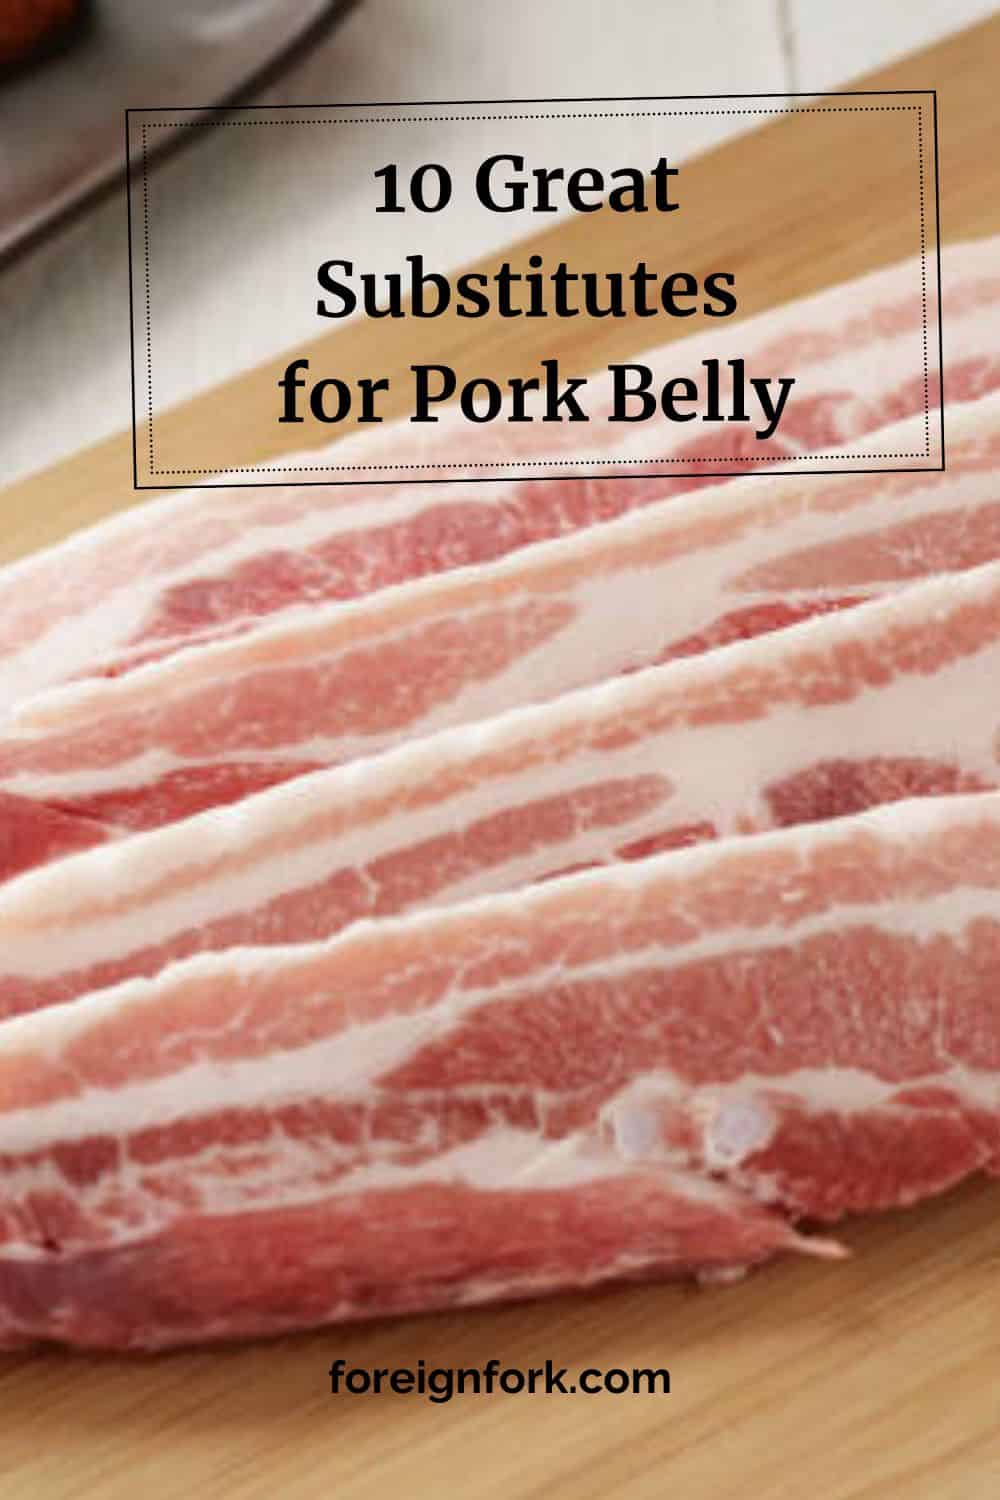 Pinterest image of sliced pork belly on a wooden cutting board for 10 great substitutes for pork belly.